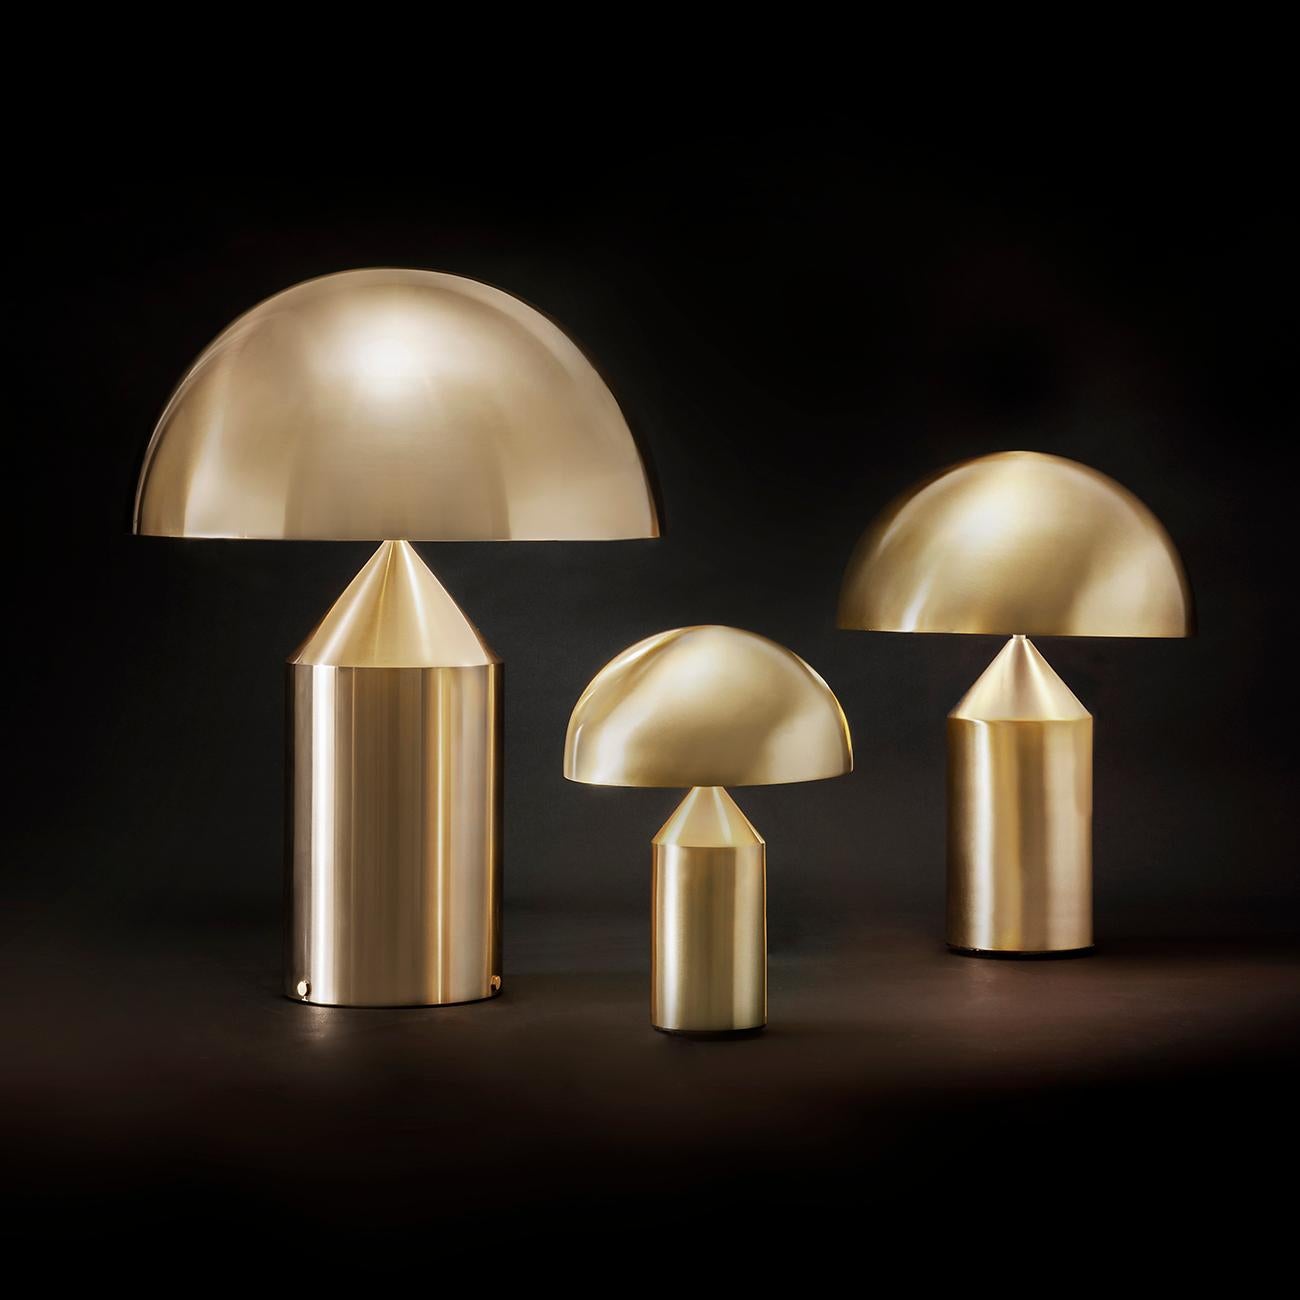 Table lamp designed by Vico Magistretti in 1977
Manufactured by Oluce, Italy.

Designed in 1977 by Vico Magistretti, over the years, Atollo has become the archetype of the table lamp, winning the Compasso d’Oro in 1979 and completely